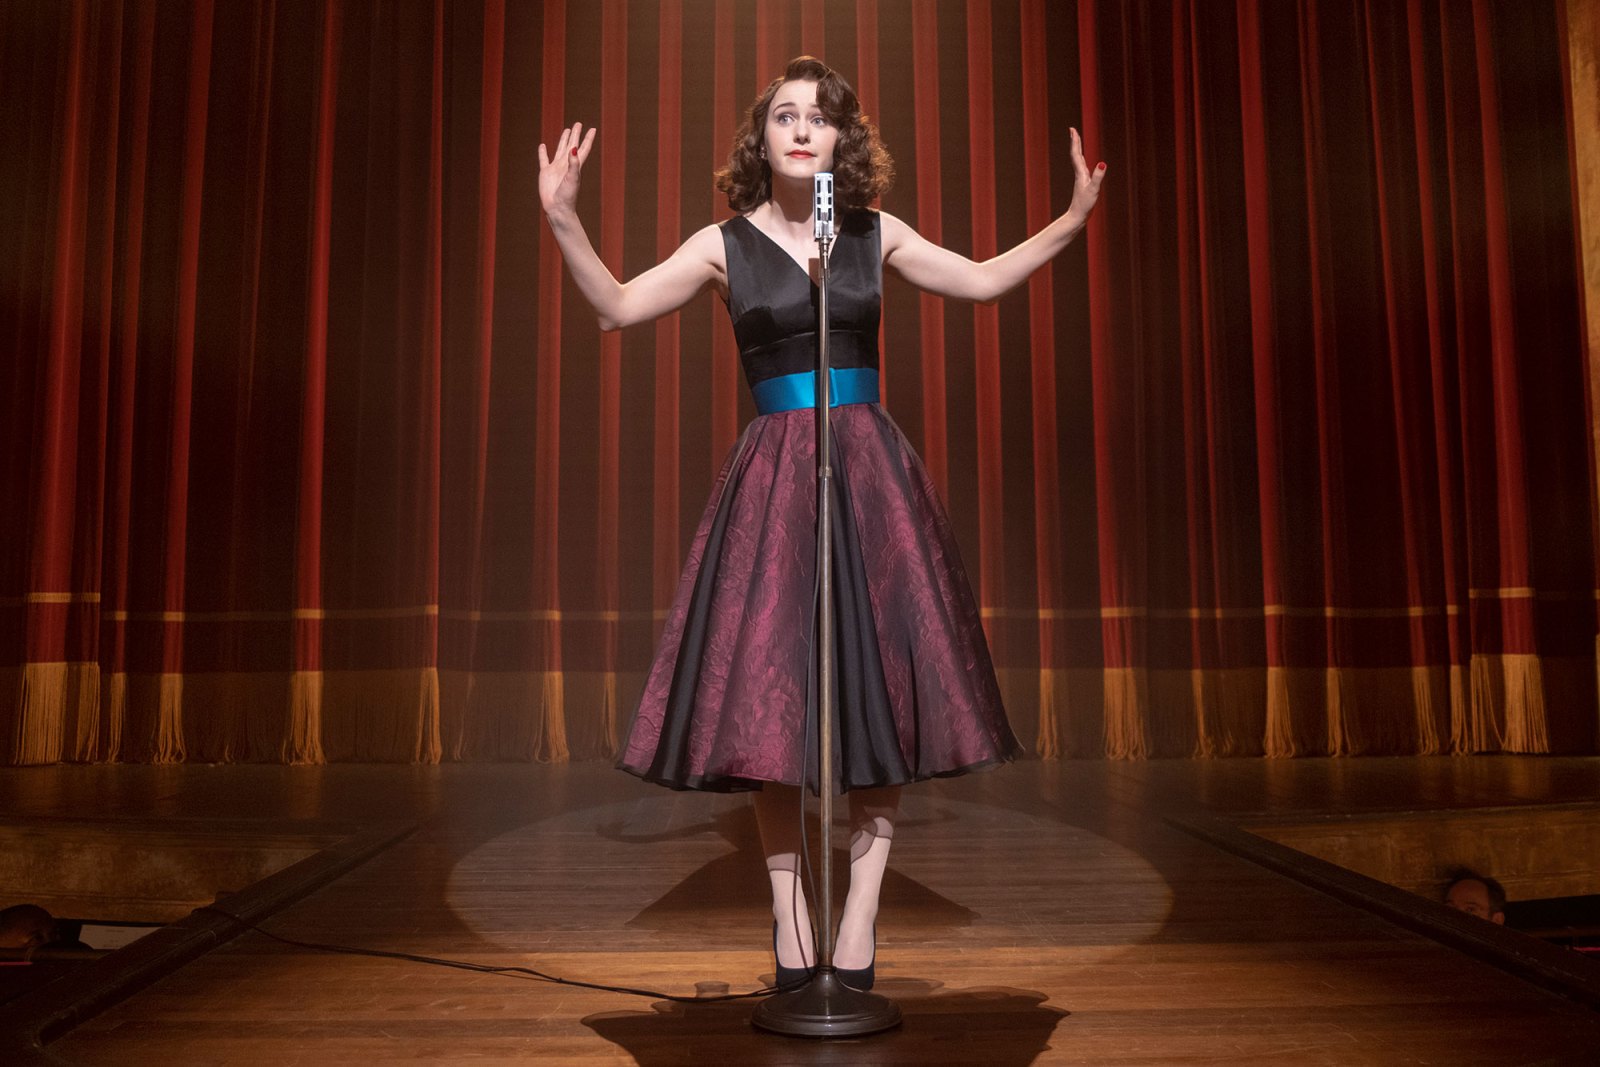 Everything We Know So Far About the Final Season of The Marvelous Mrs. Maisel